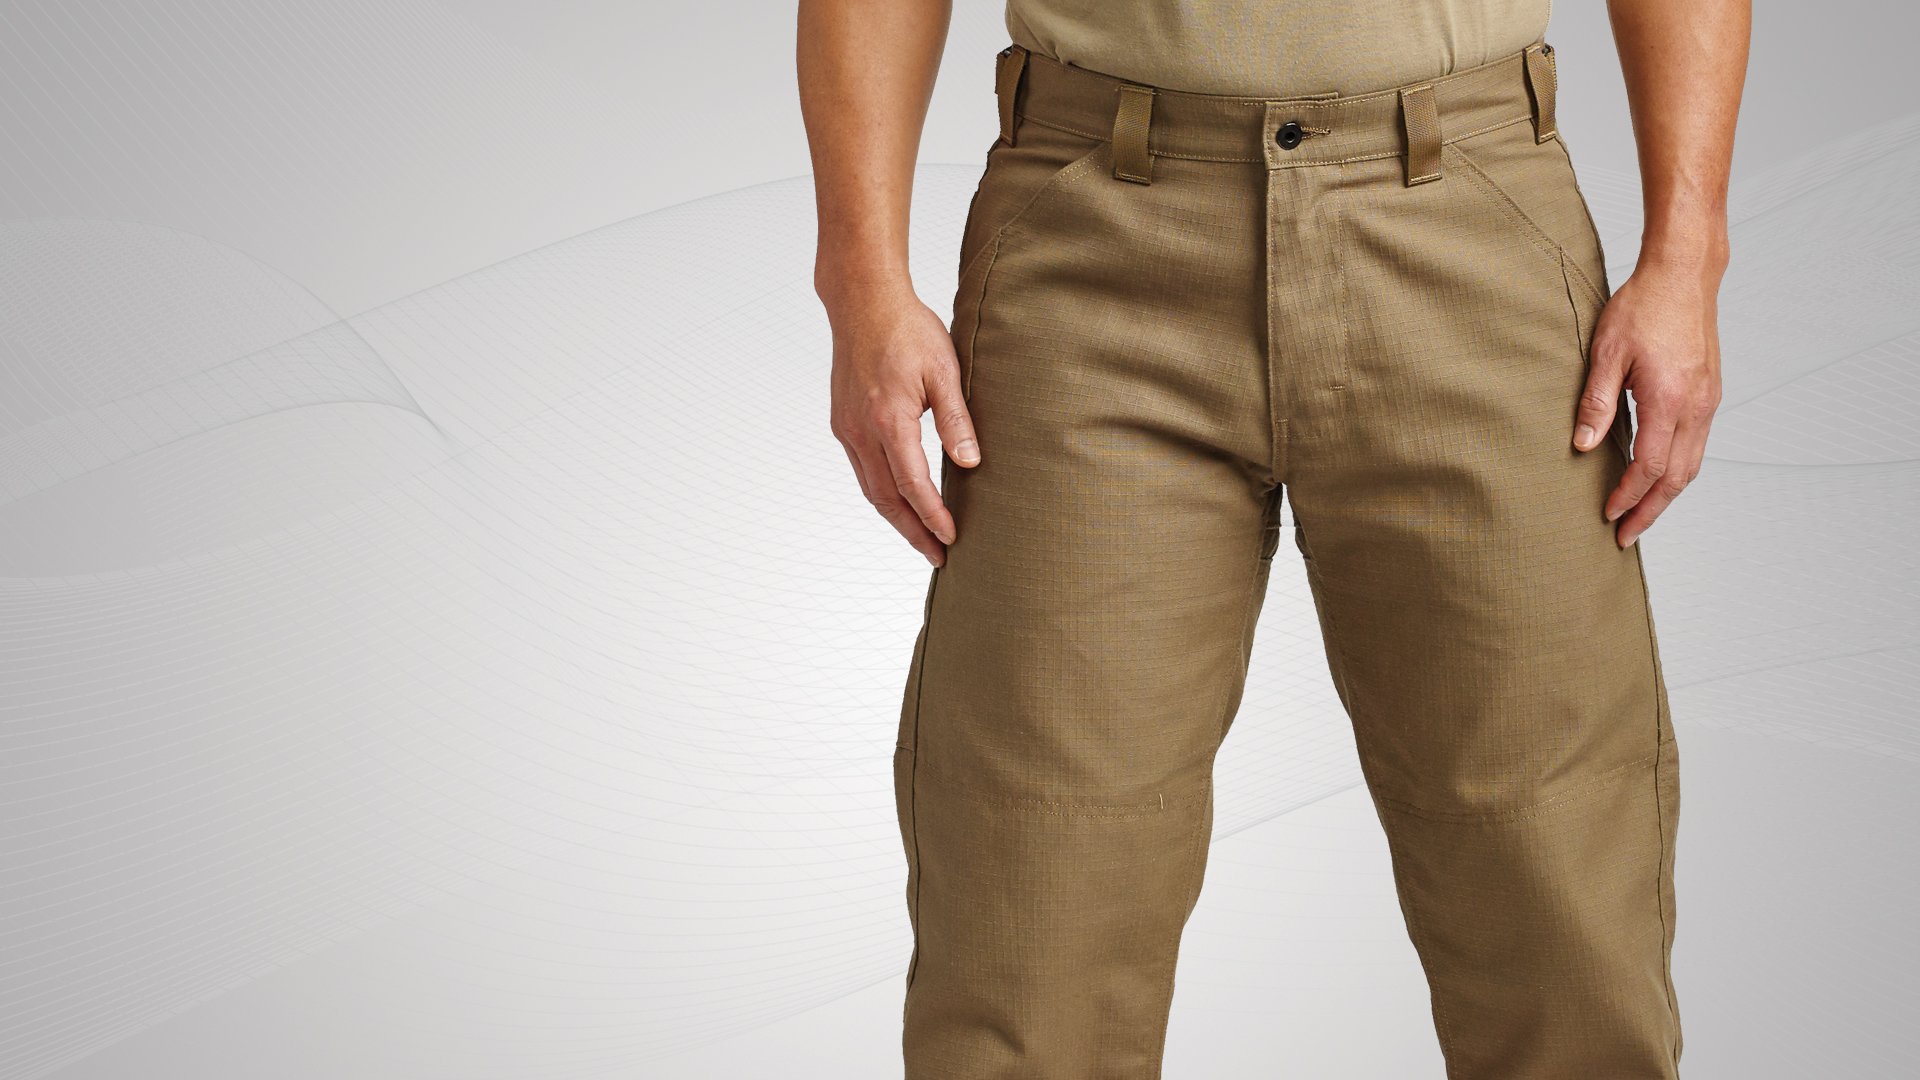 upgrade your pants with kevlar protected fabric